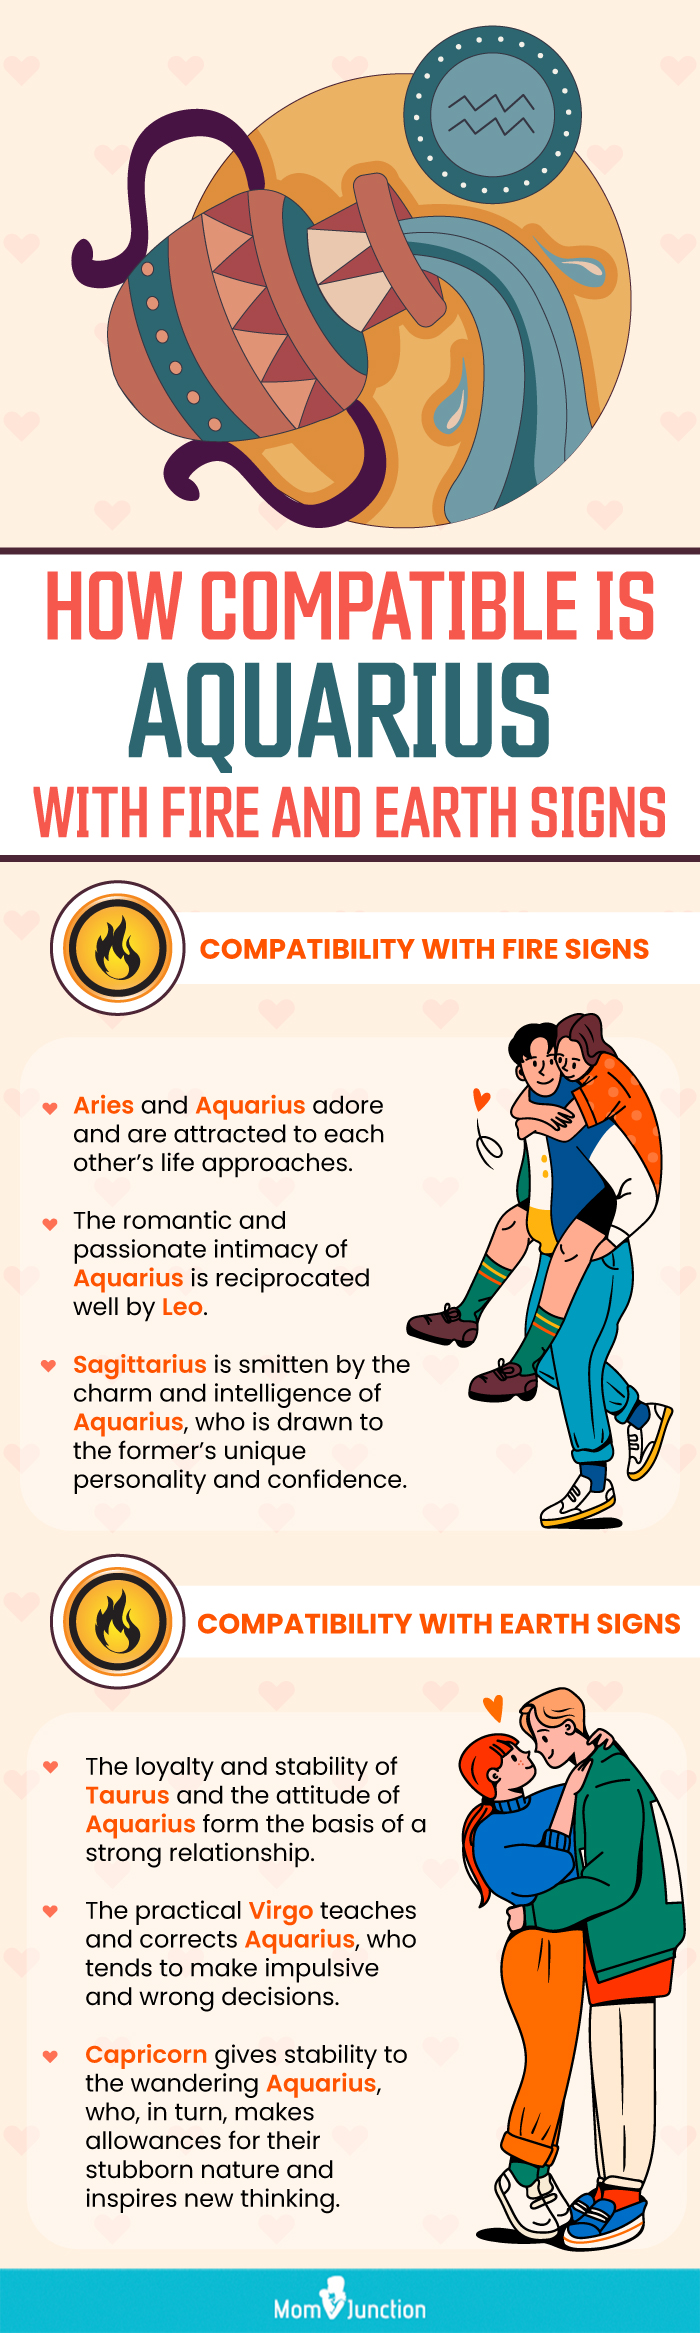 how compatible is aquarius with fire and earth signs (infographic)